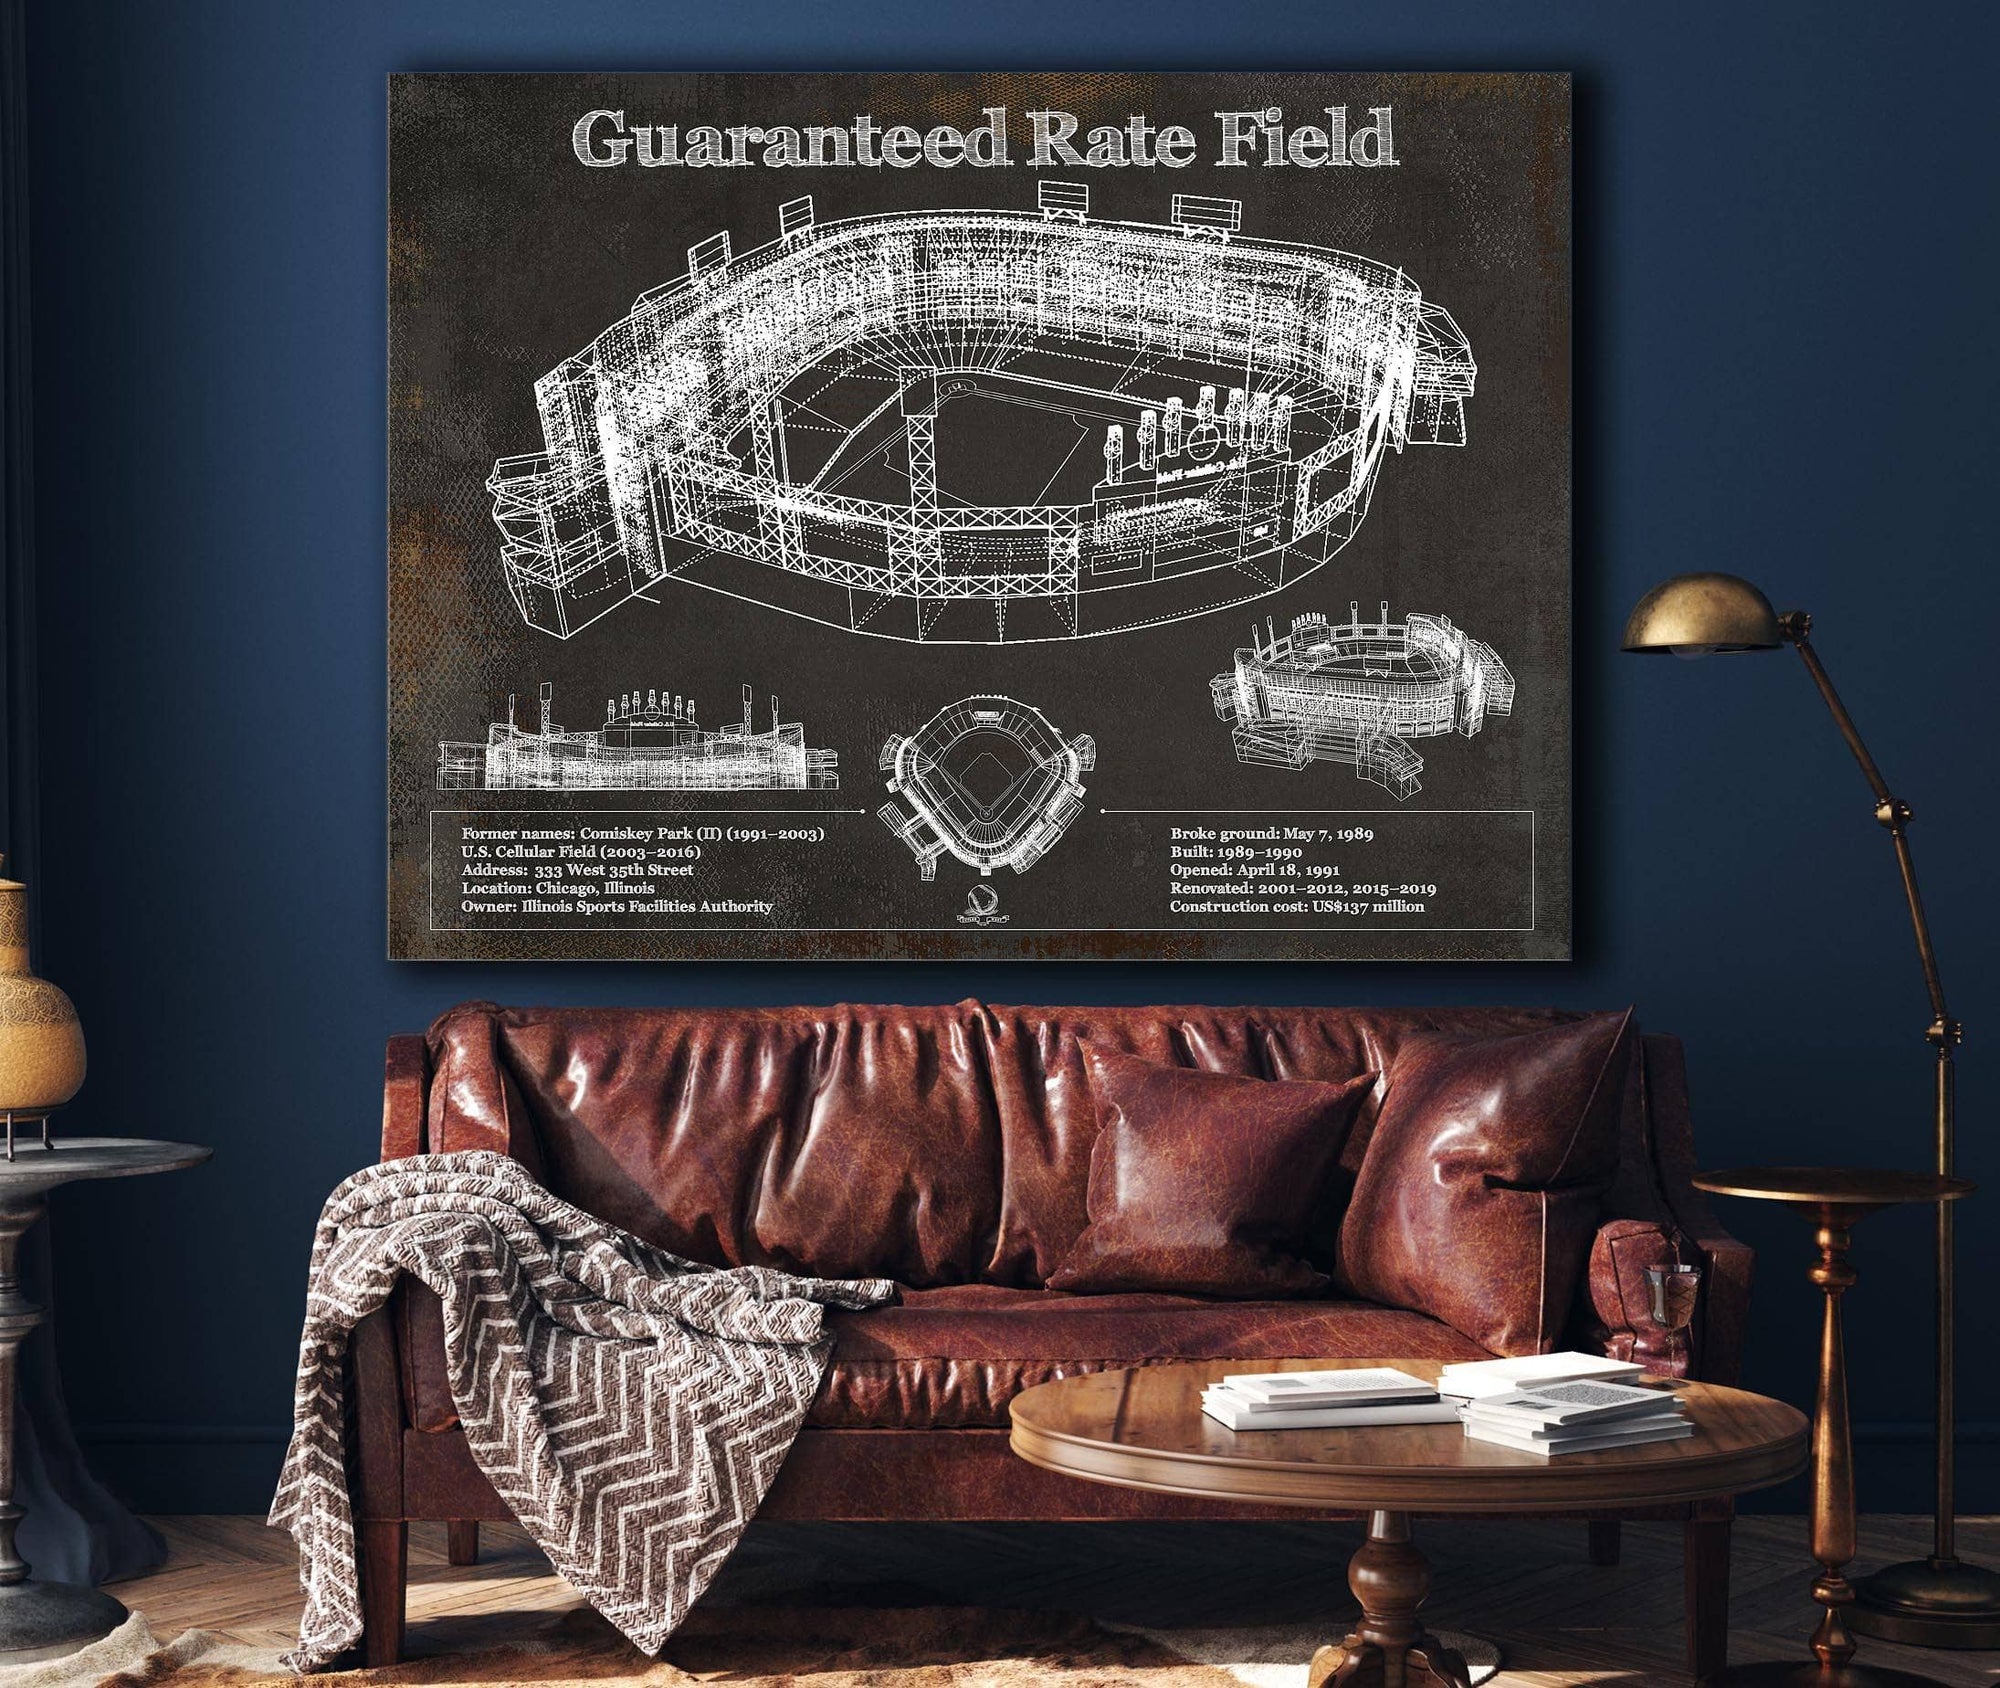 Cutler West Baseball Collection Guaranteed Rate Field - Chicago White Sox Team Color Vintage Baseball Fan Print